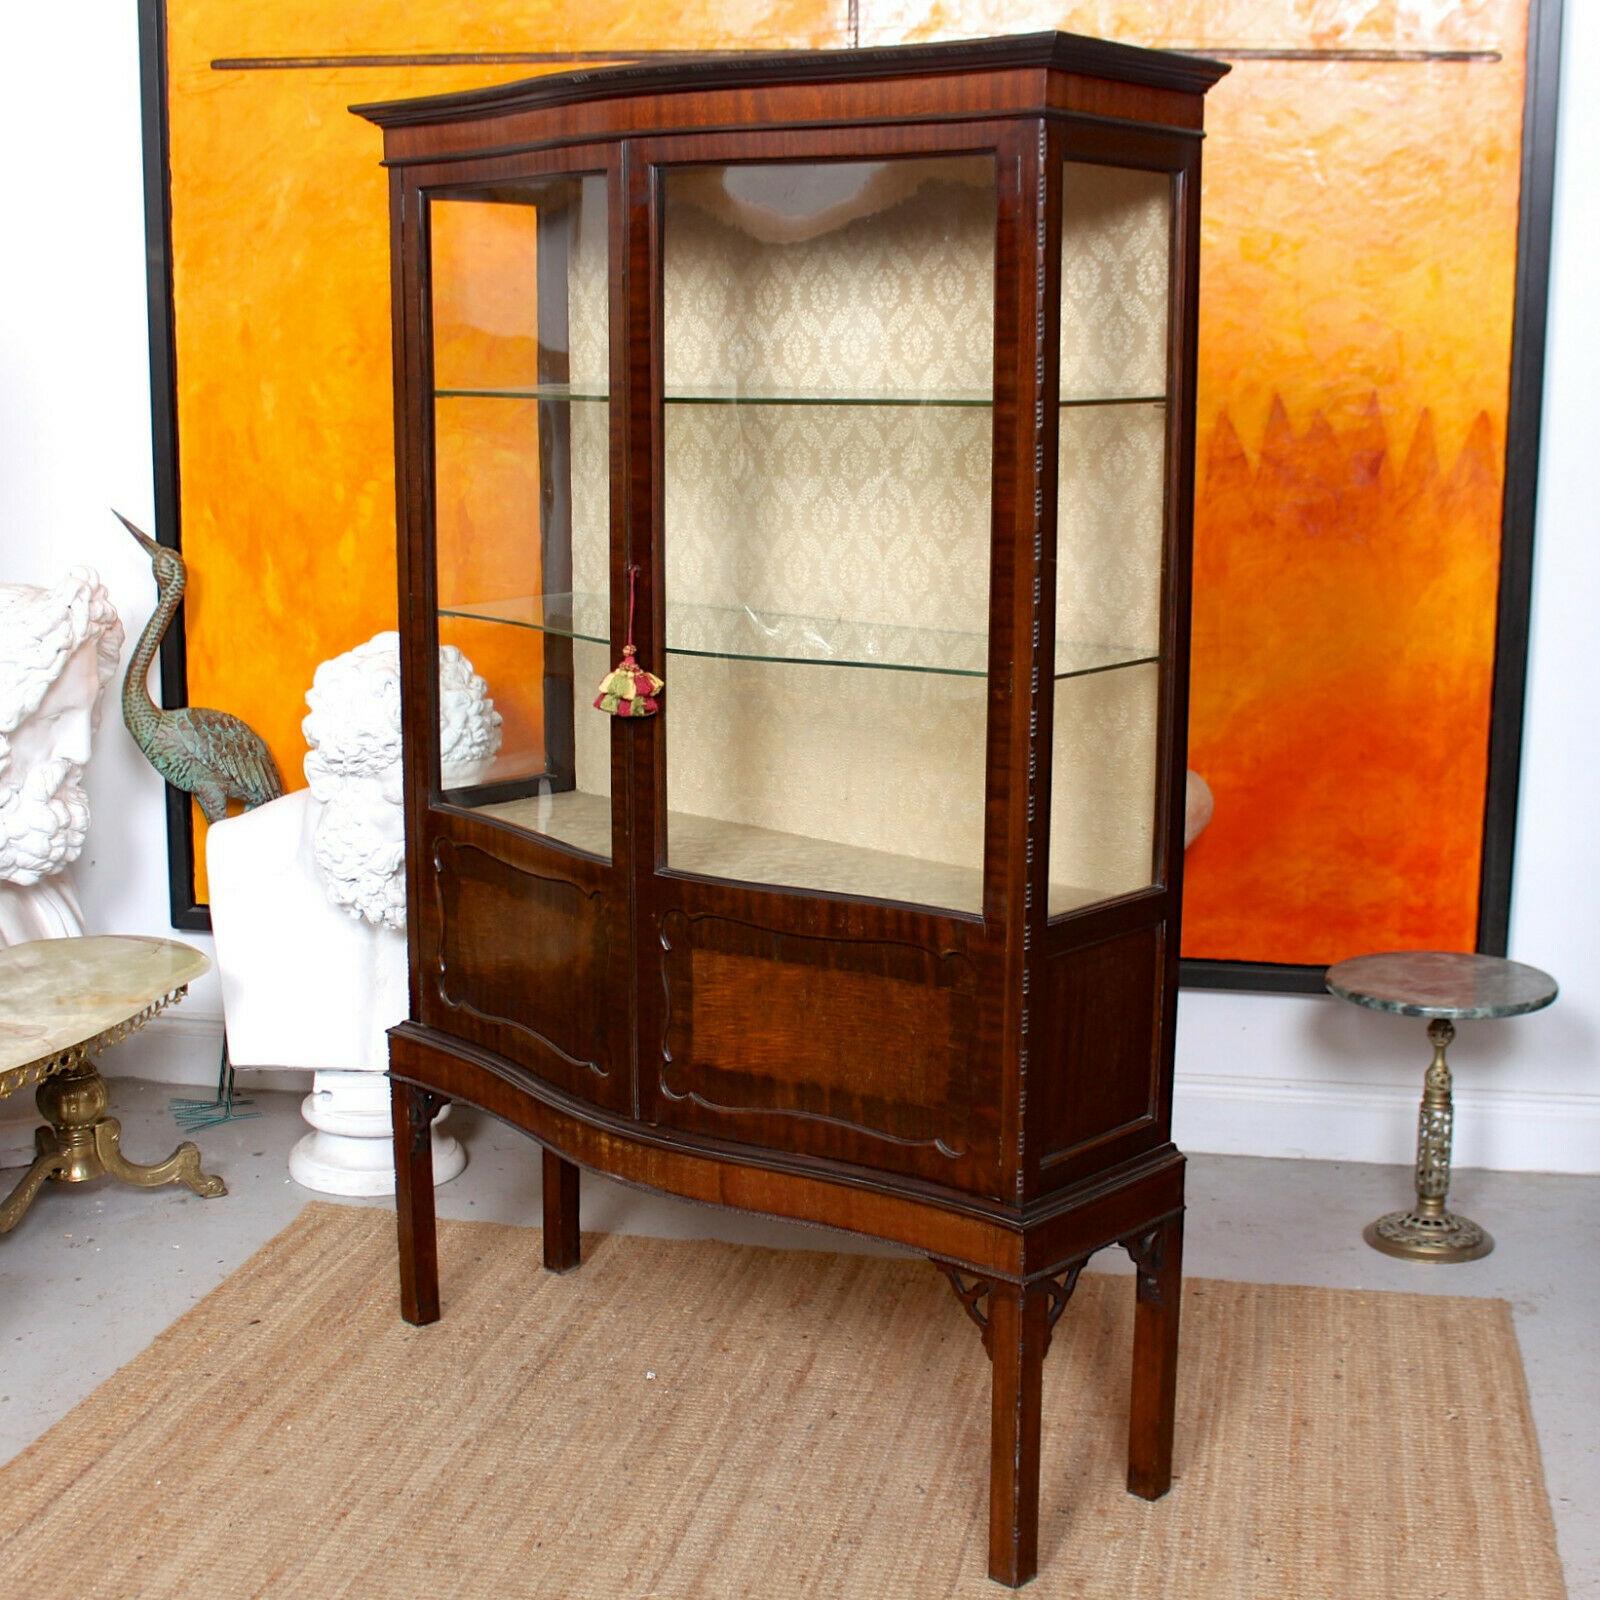 English Antique Glazed Bookcase Display Cabinet Edwardian Serpentine Mahogany In Good Condition For Sale In Newcastle upon Tyne, GB